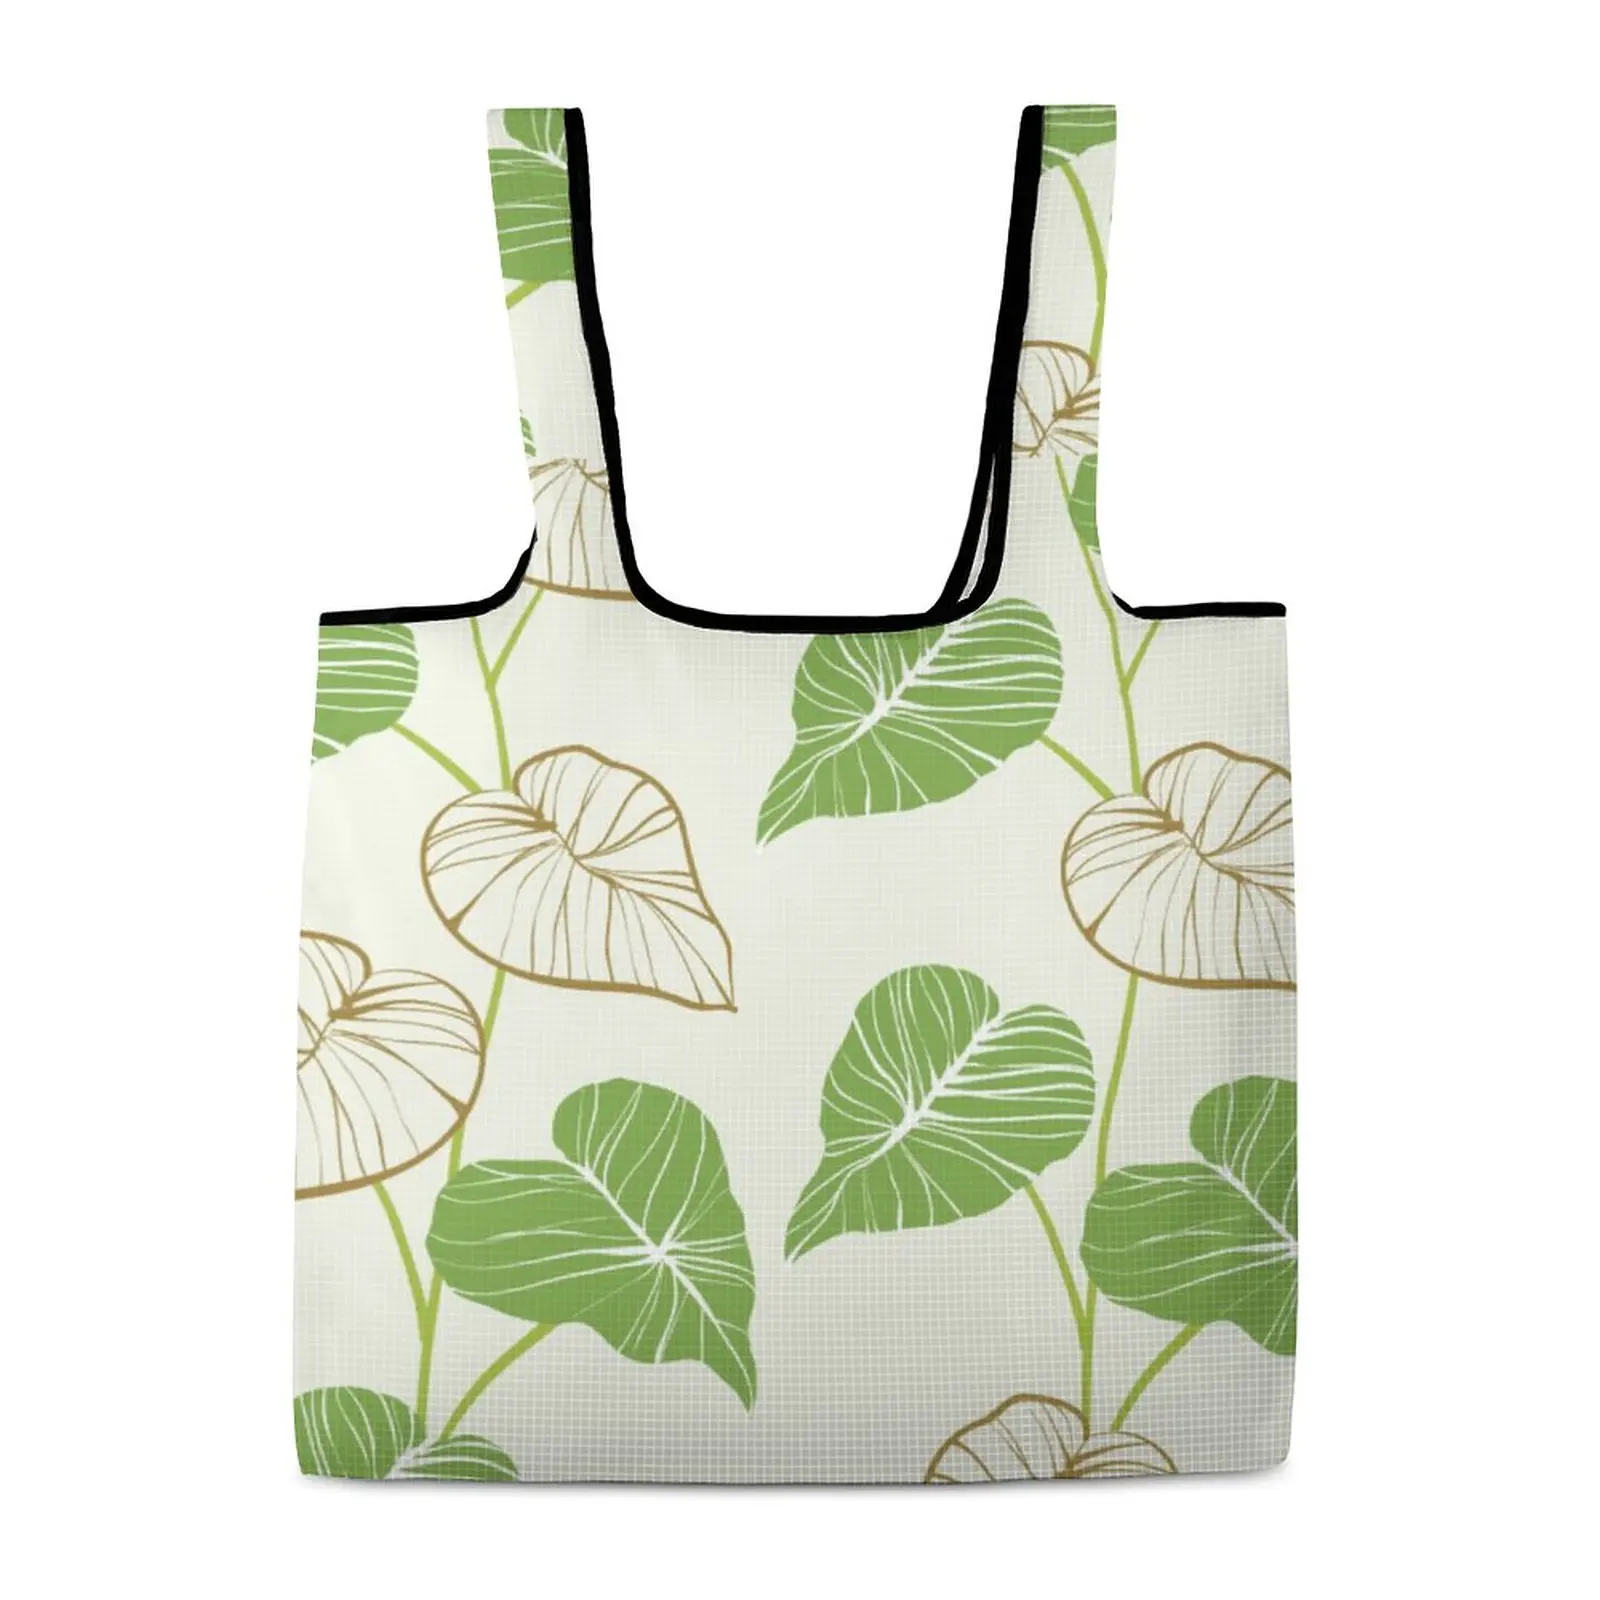 Green Leaf Aesthetic Bags Foldable Tote Pouch Shopper Bags Waterproof Foldable Shopping Bags Travel Grocery Handbag